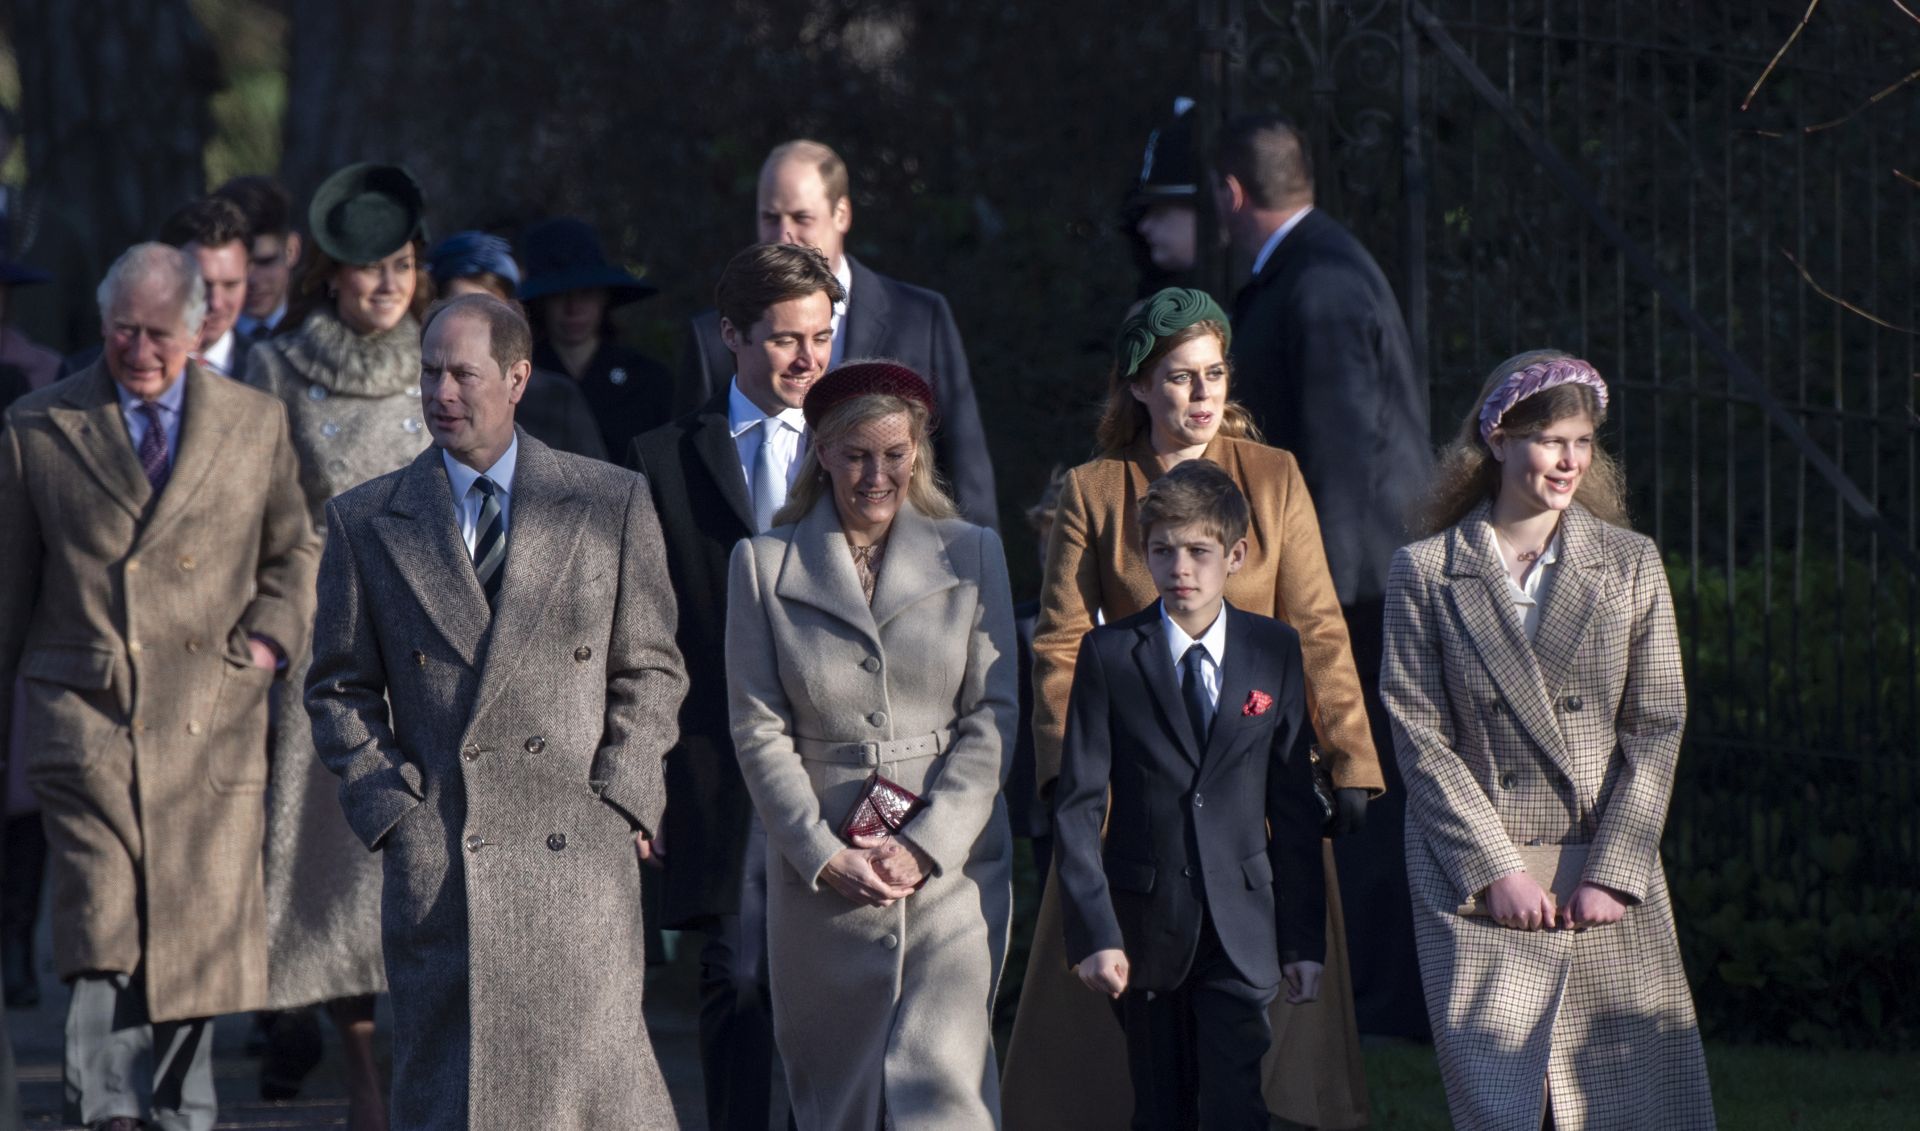 epa08089973 (L-R) Britain's Prince Edward, Earl of Wessex, his wife Sophie, Countess of Wessex and their children, James, Viscount Severn and Lady Louise Windsor attend the Christmas Day morning church service at St. Mary Magdalene Church in Sandringham, Norfolk, Britain, 25 December 2019.  EPA/STR UK OUT - SHUTTERSTOCK OUT